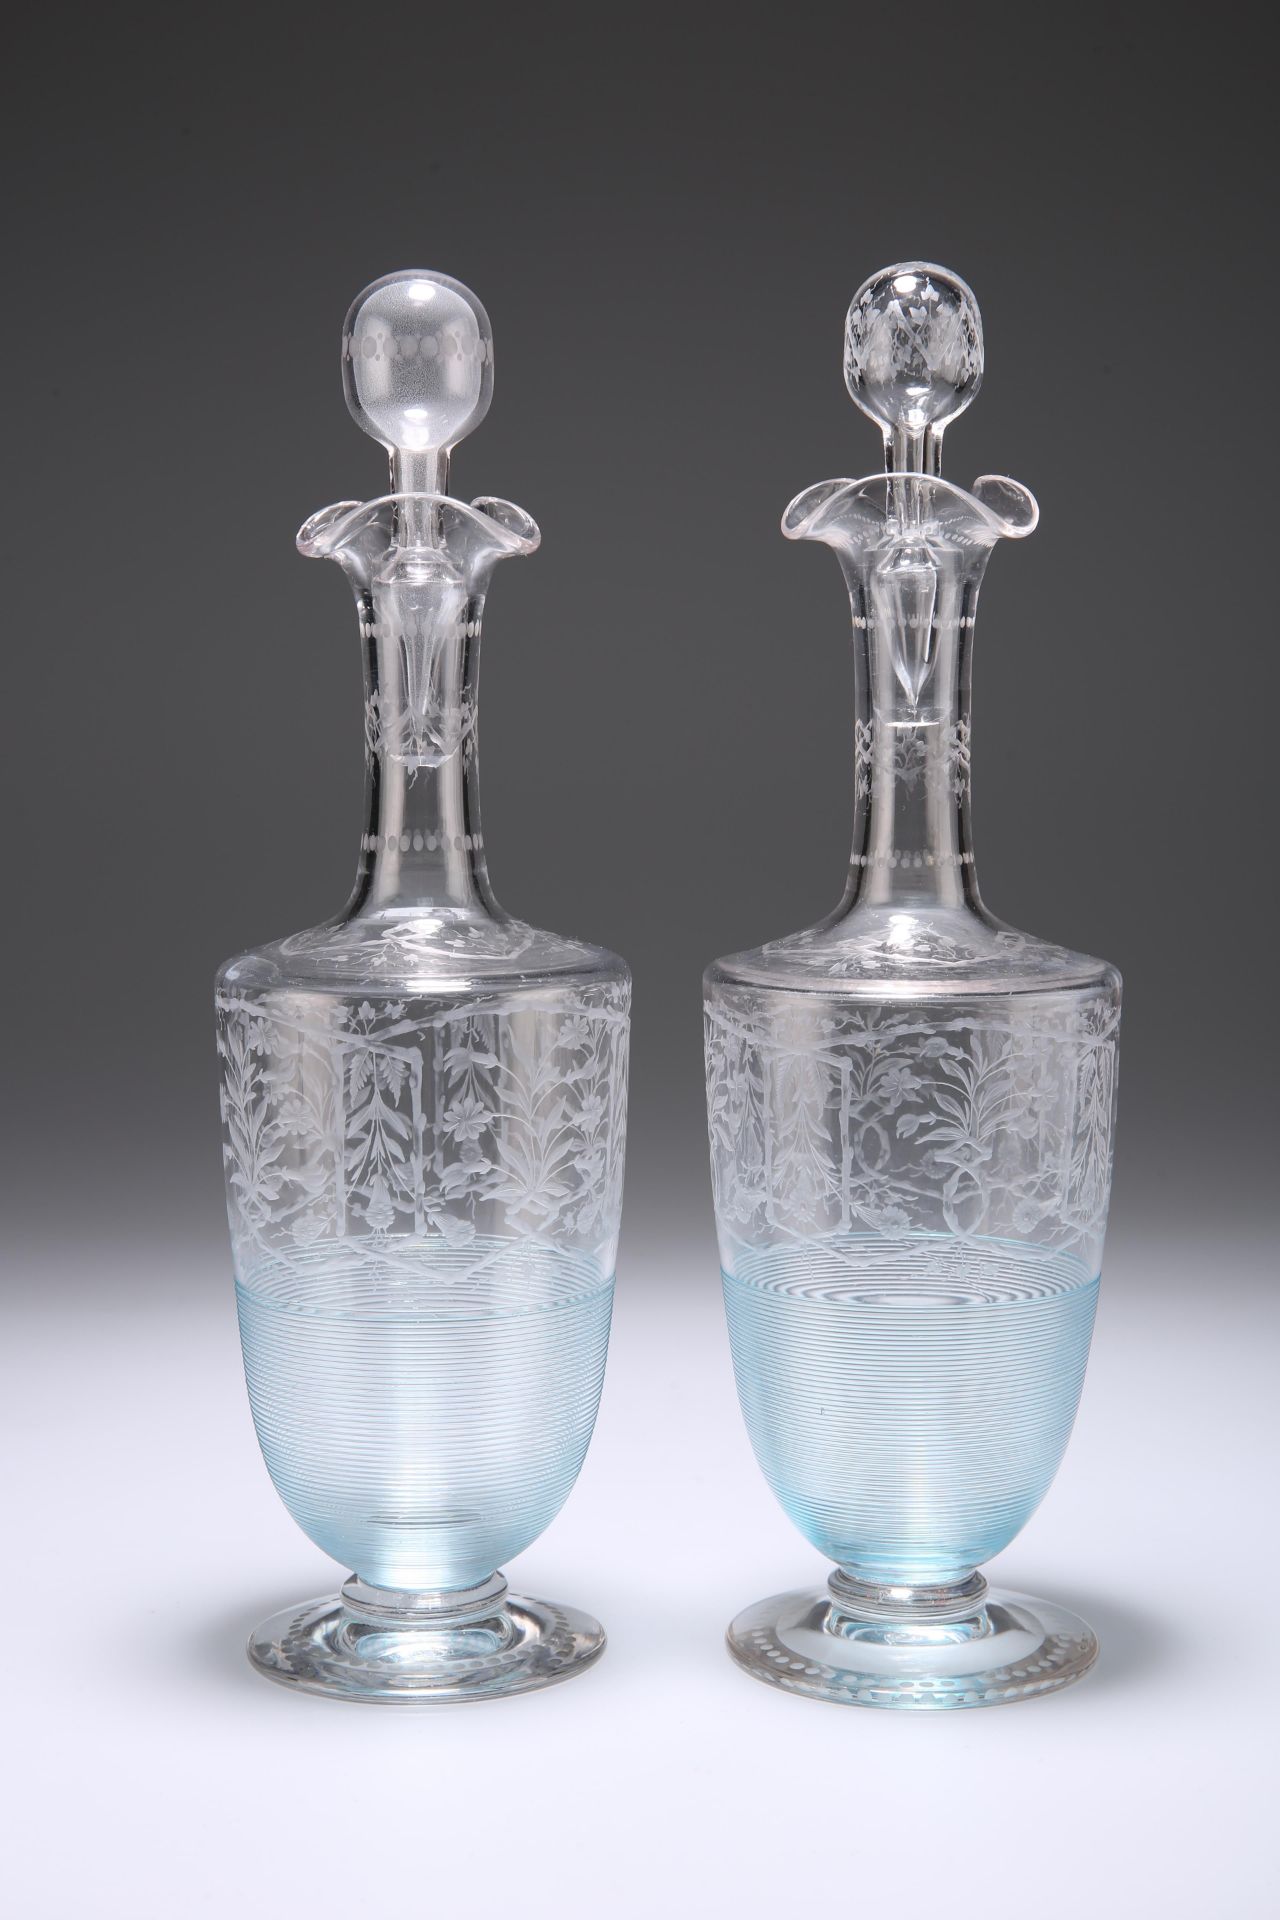 A MATCHED PAIR OF LATE 19TH CENTURY STOURBRIDGE ENGRAVED DECANTERS